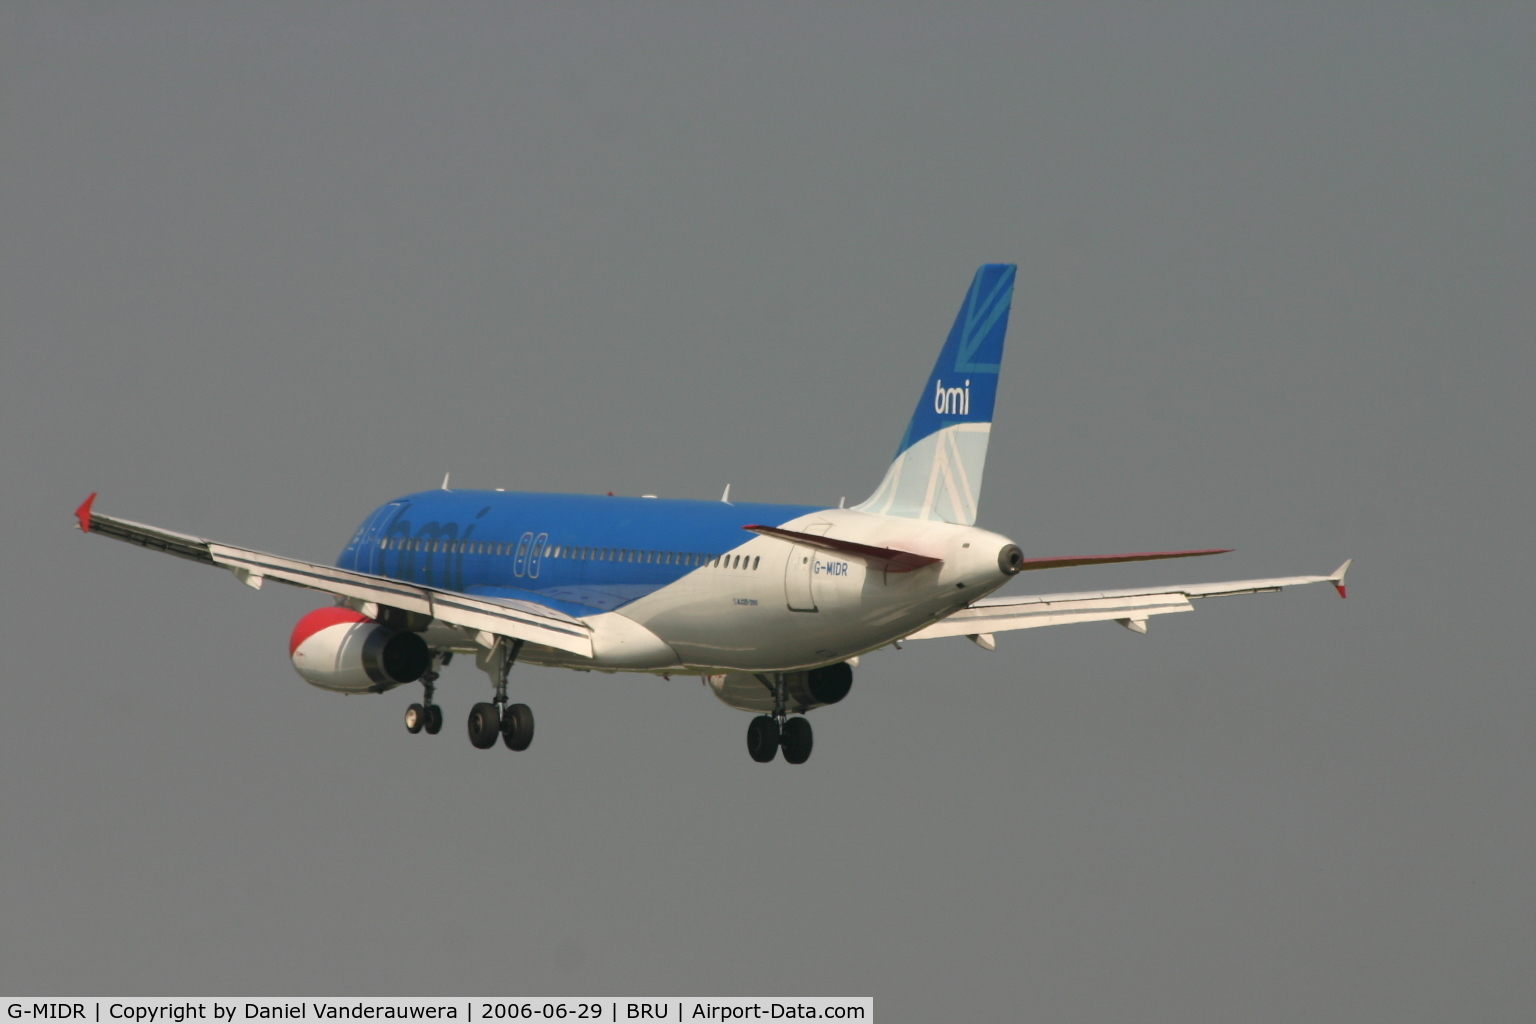 G-MIDR, 2002 Airbus A320-232 C/N 1697, several seconds before touching rwy 25L